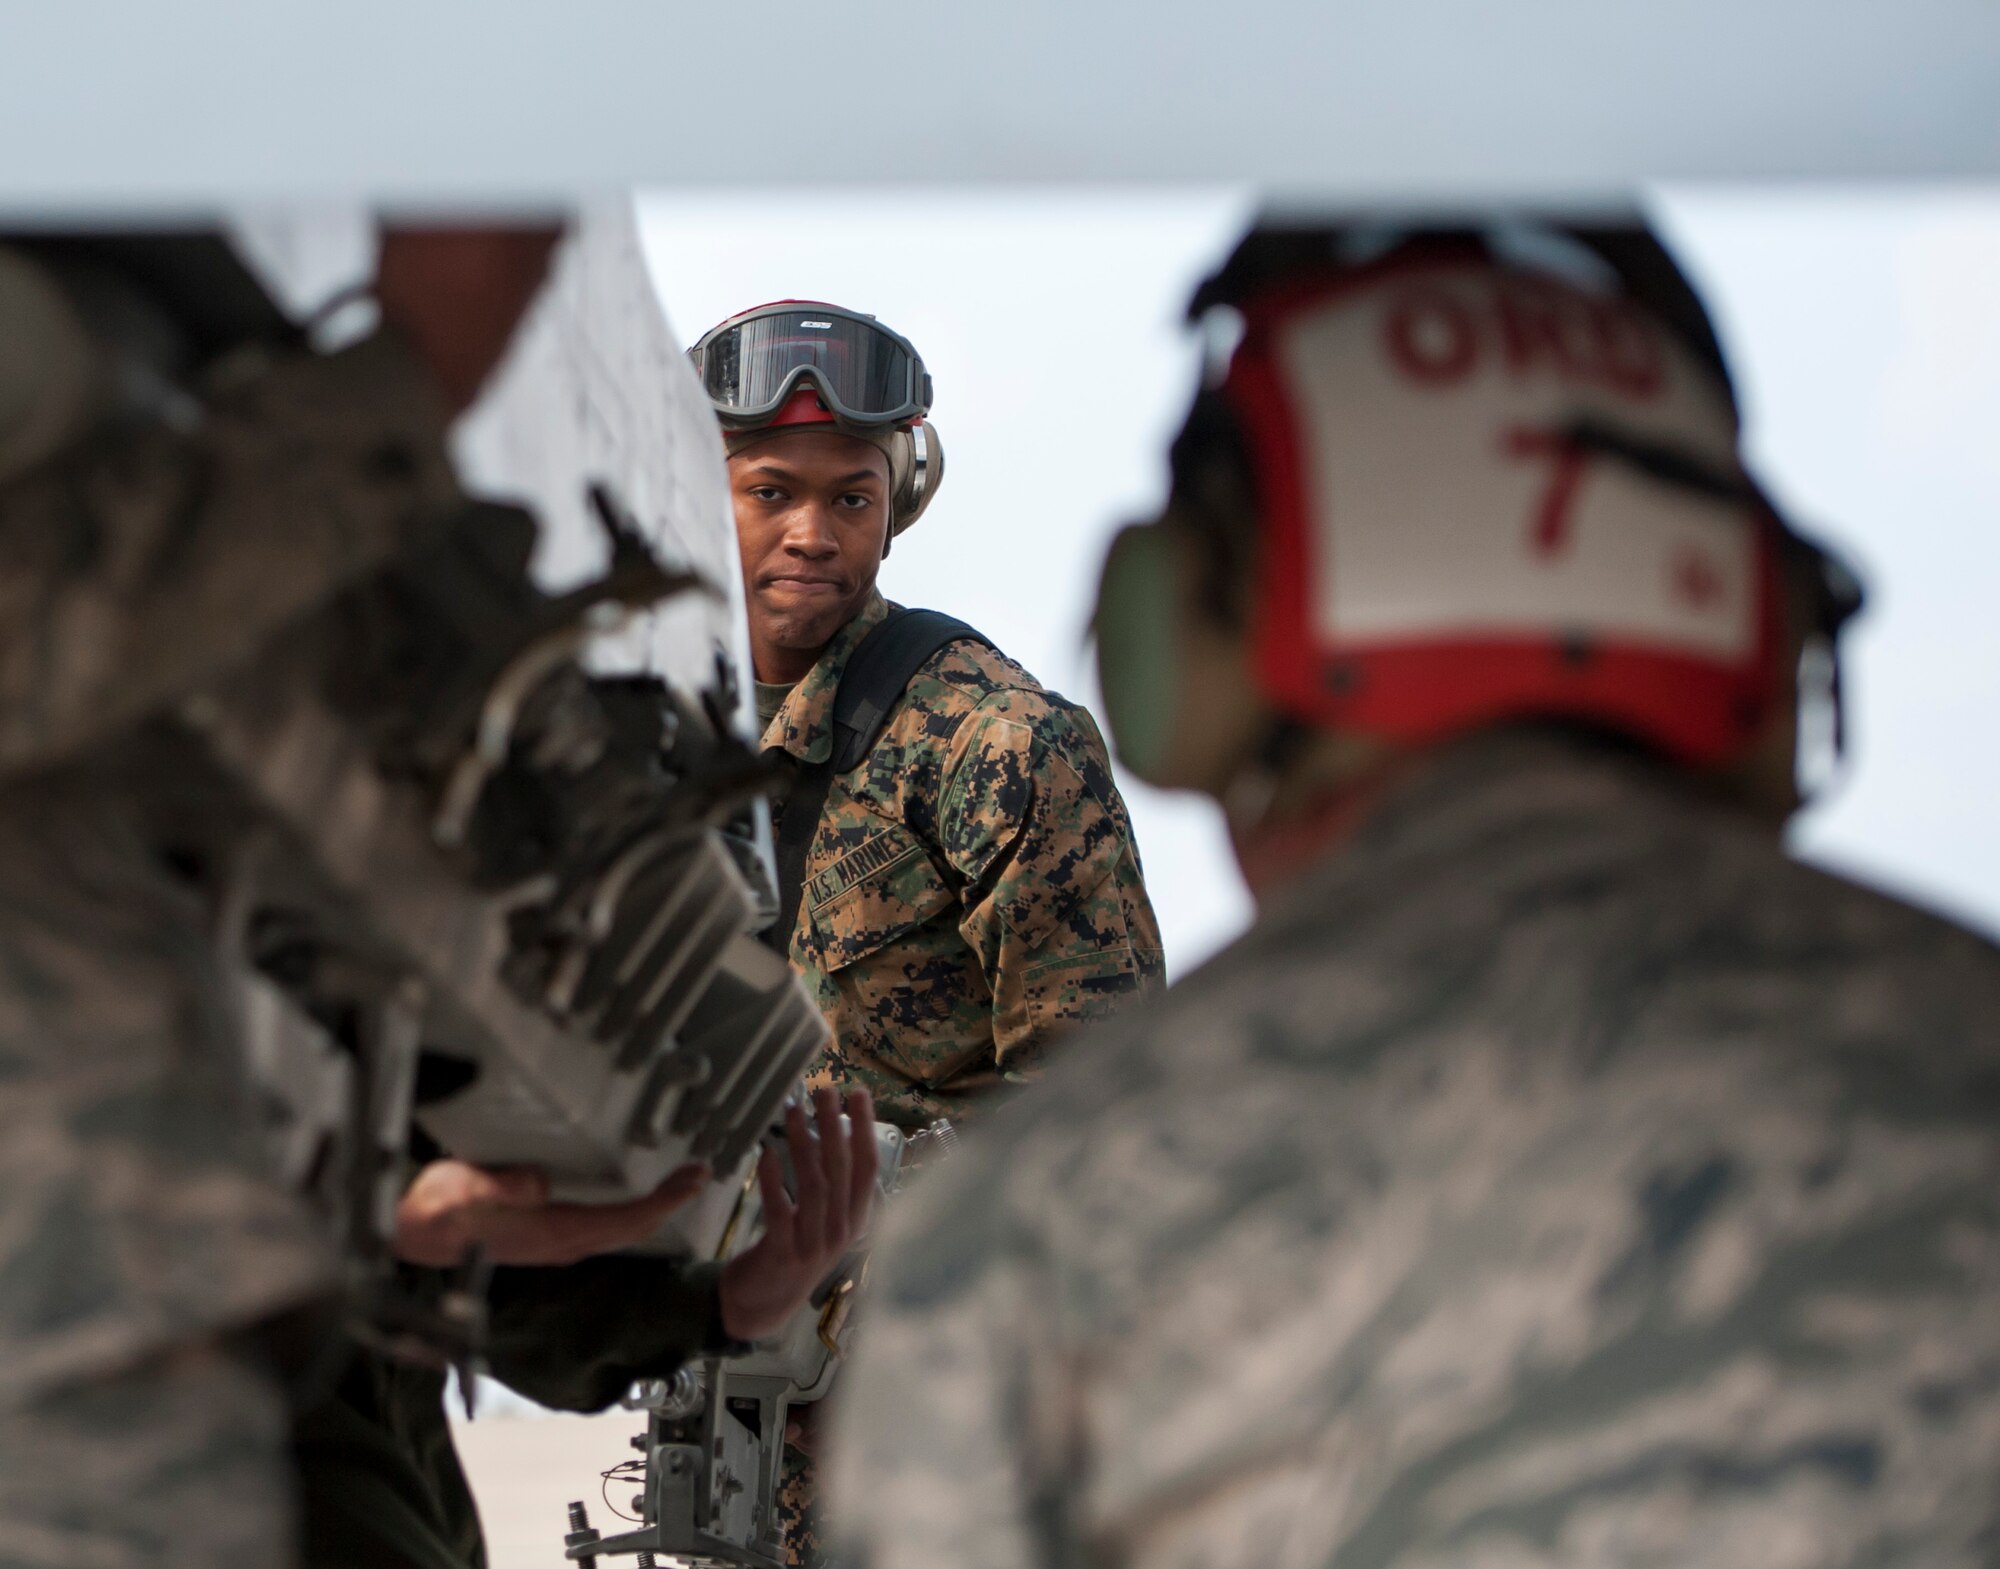 Lance Cpl. Antonio Benton, Marine Fighter Attack Squadron 232, helps instruct Airmen on Marine Corps loading procedures at Kunsan Air Base, Republic of Korea, Nov. 4, 2013. The 8th Maintenance Squadron munitions systems section builds and maintains missiles and bombs in support of the Marine Corps ordnance technicians during Max Thunder. The Airmen partook in the Marine mission and are just one of several teams working side-by-side during the exercise. (U.S. Air Force photo by Senior Airman Armando A. Schwier-Morales/Released) 